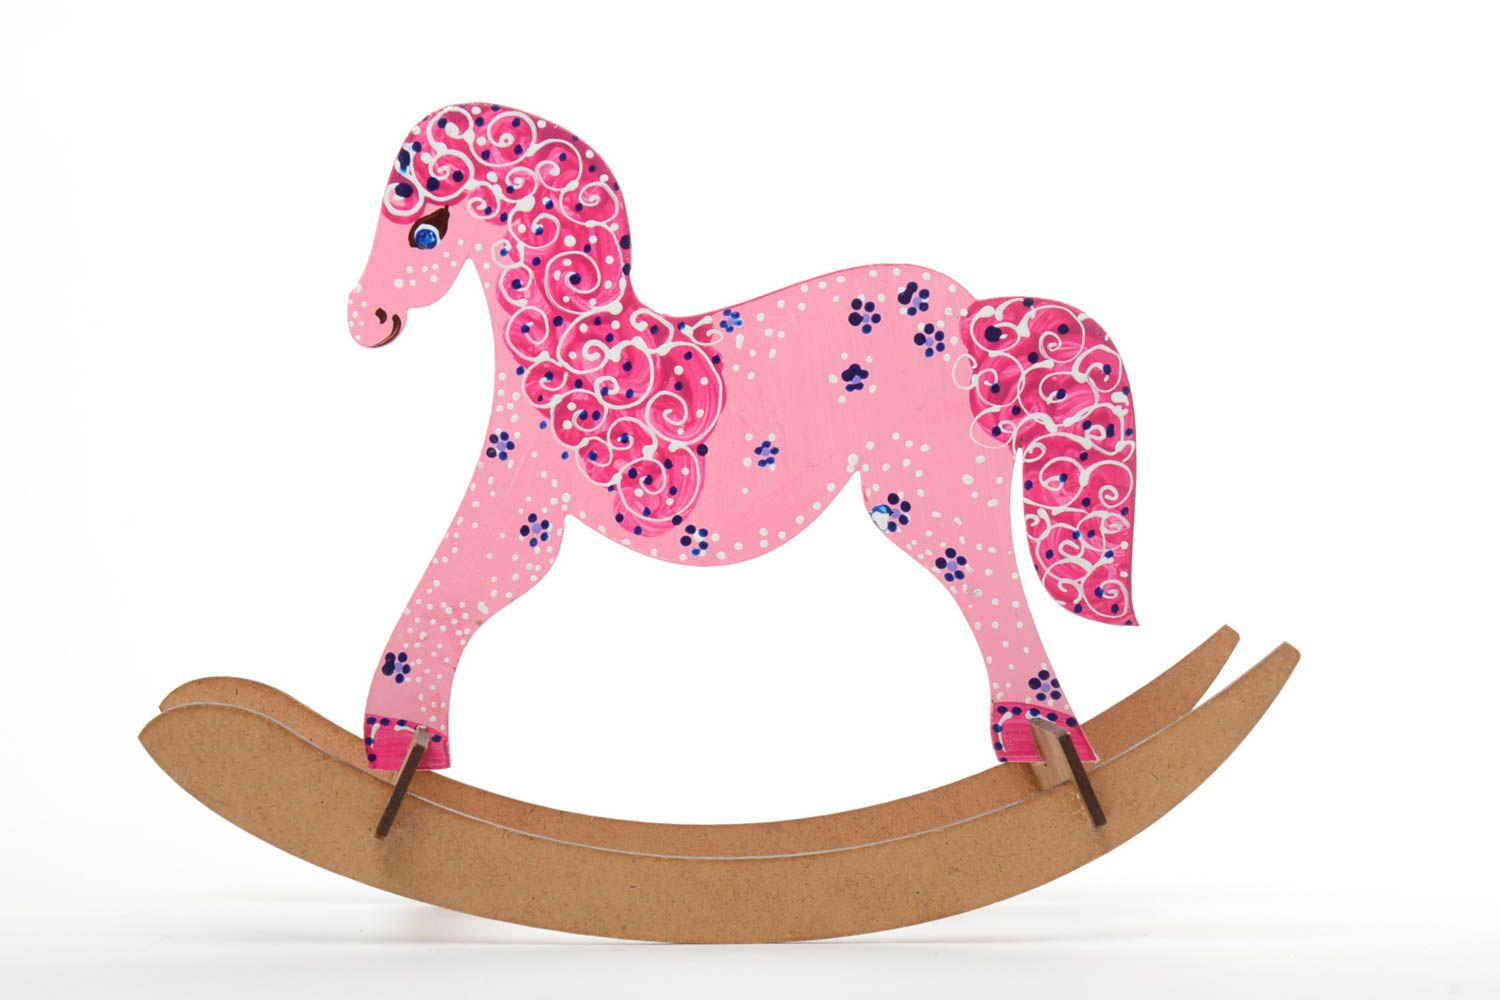 Children's handmade painted wooden toy rocking horse of small size photo 2